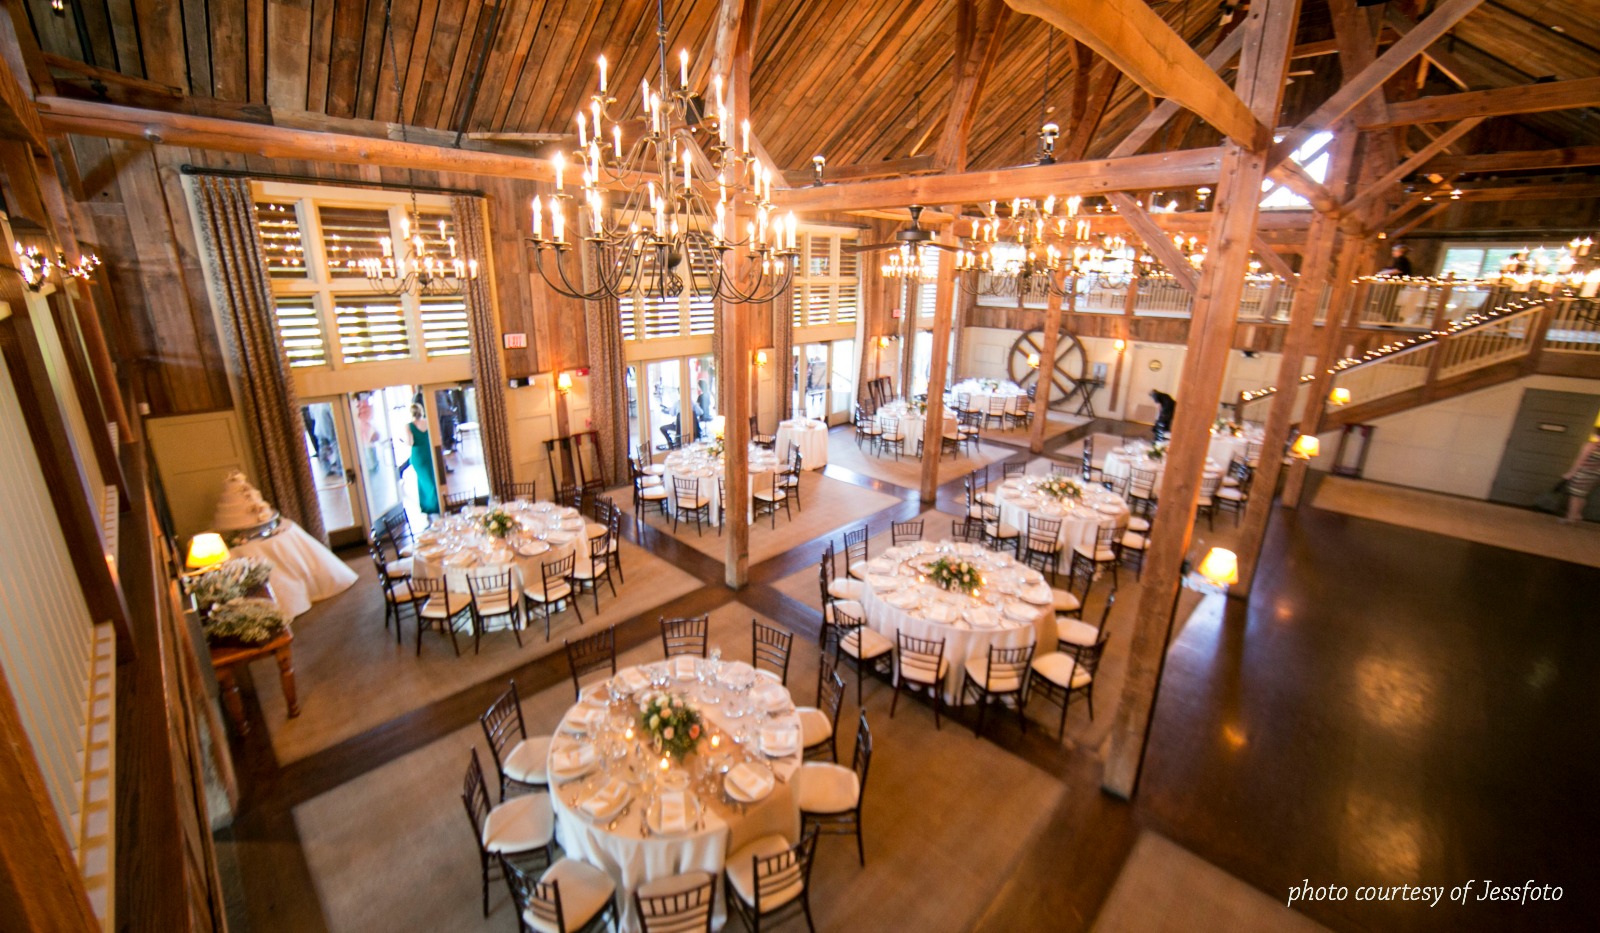 Barn interior fully set for event with several large rounds set for 10 guests each, vaulted ceilings and elegant chandeliers 